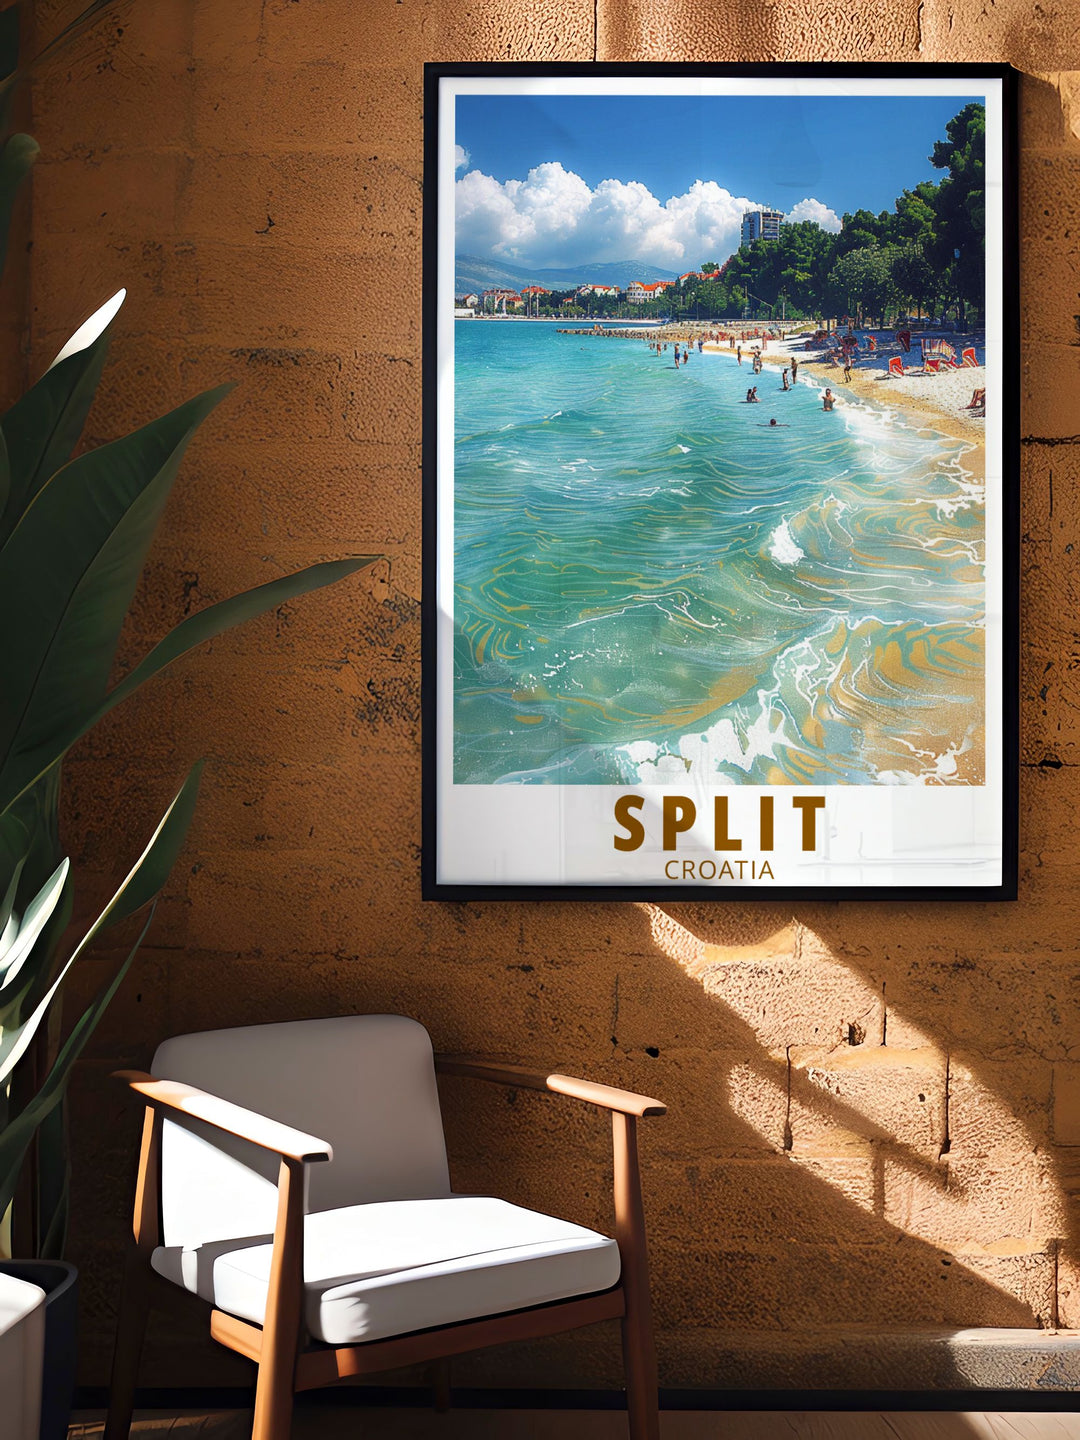 Explore the historic charm of Split, Croatia, with this vibrant poster featuring Bačvice Beach, capturing the rich heritage and coastal beauty of this Adriatic city.